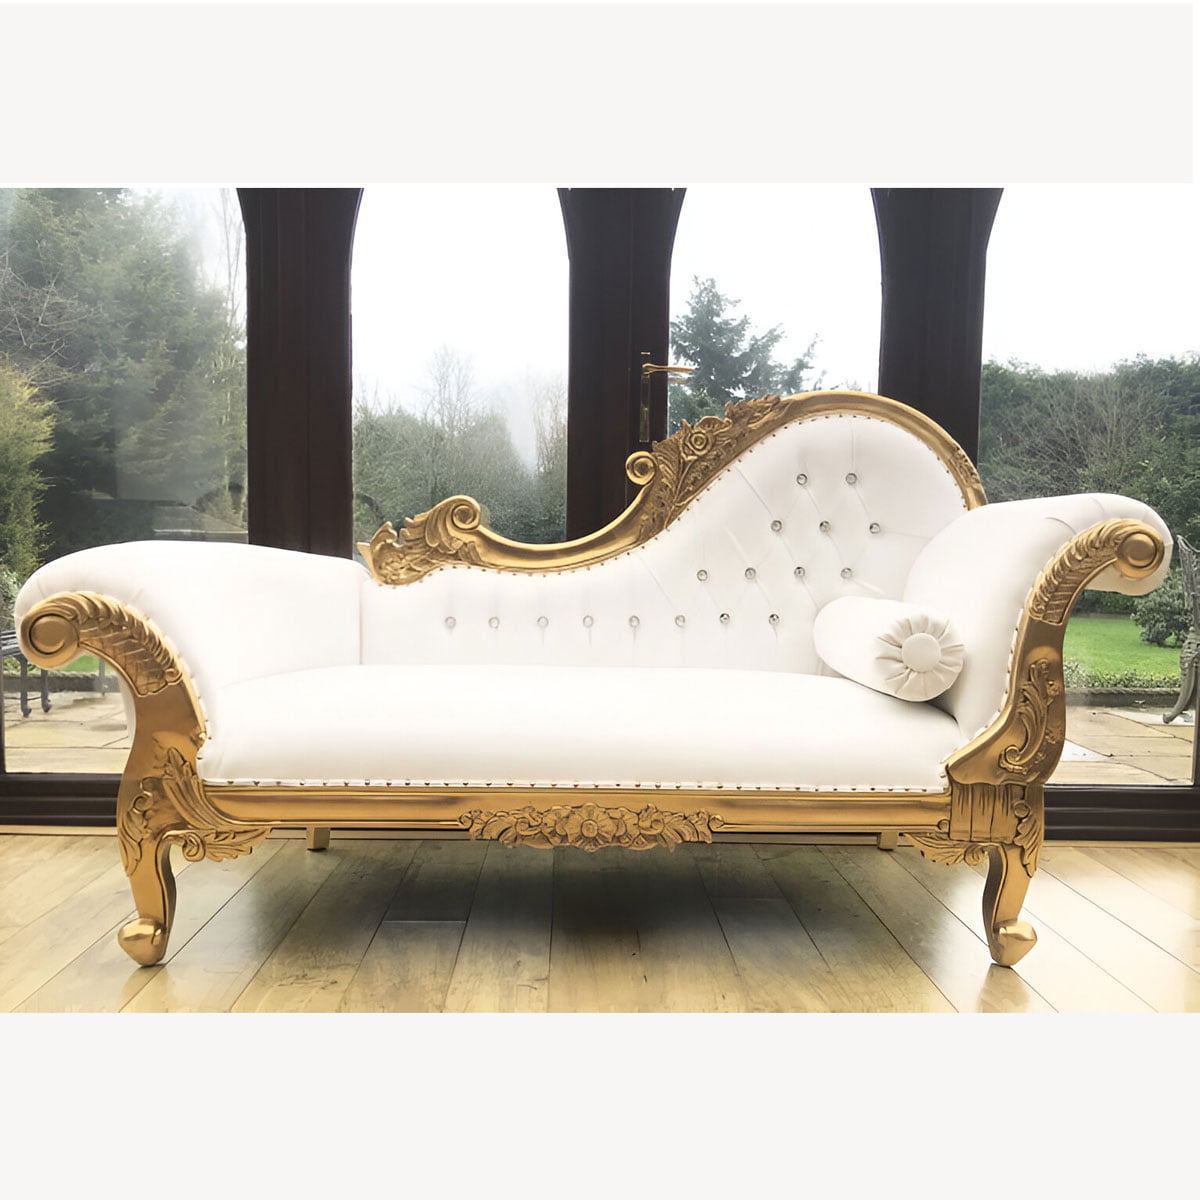 Beautiful Chaise Gold Leaf Frame With Bright White Faux Leather Medium Size With Crystal Buttons 1 - Hampshire Barn Interiors - Beautiful Chaise Gold Leaf Frame With Bright White Faux Leather Medium Size With Crystal Buttons -